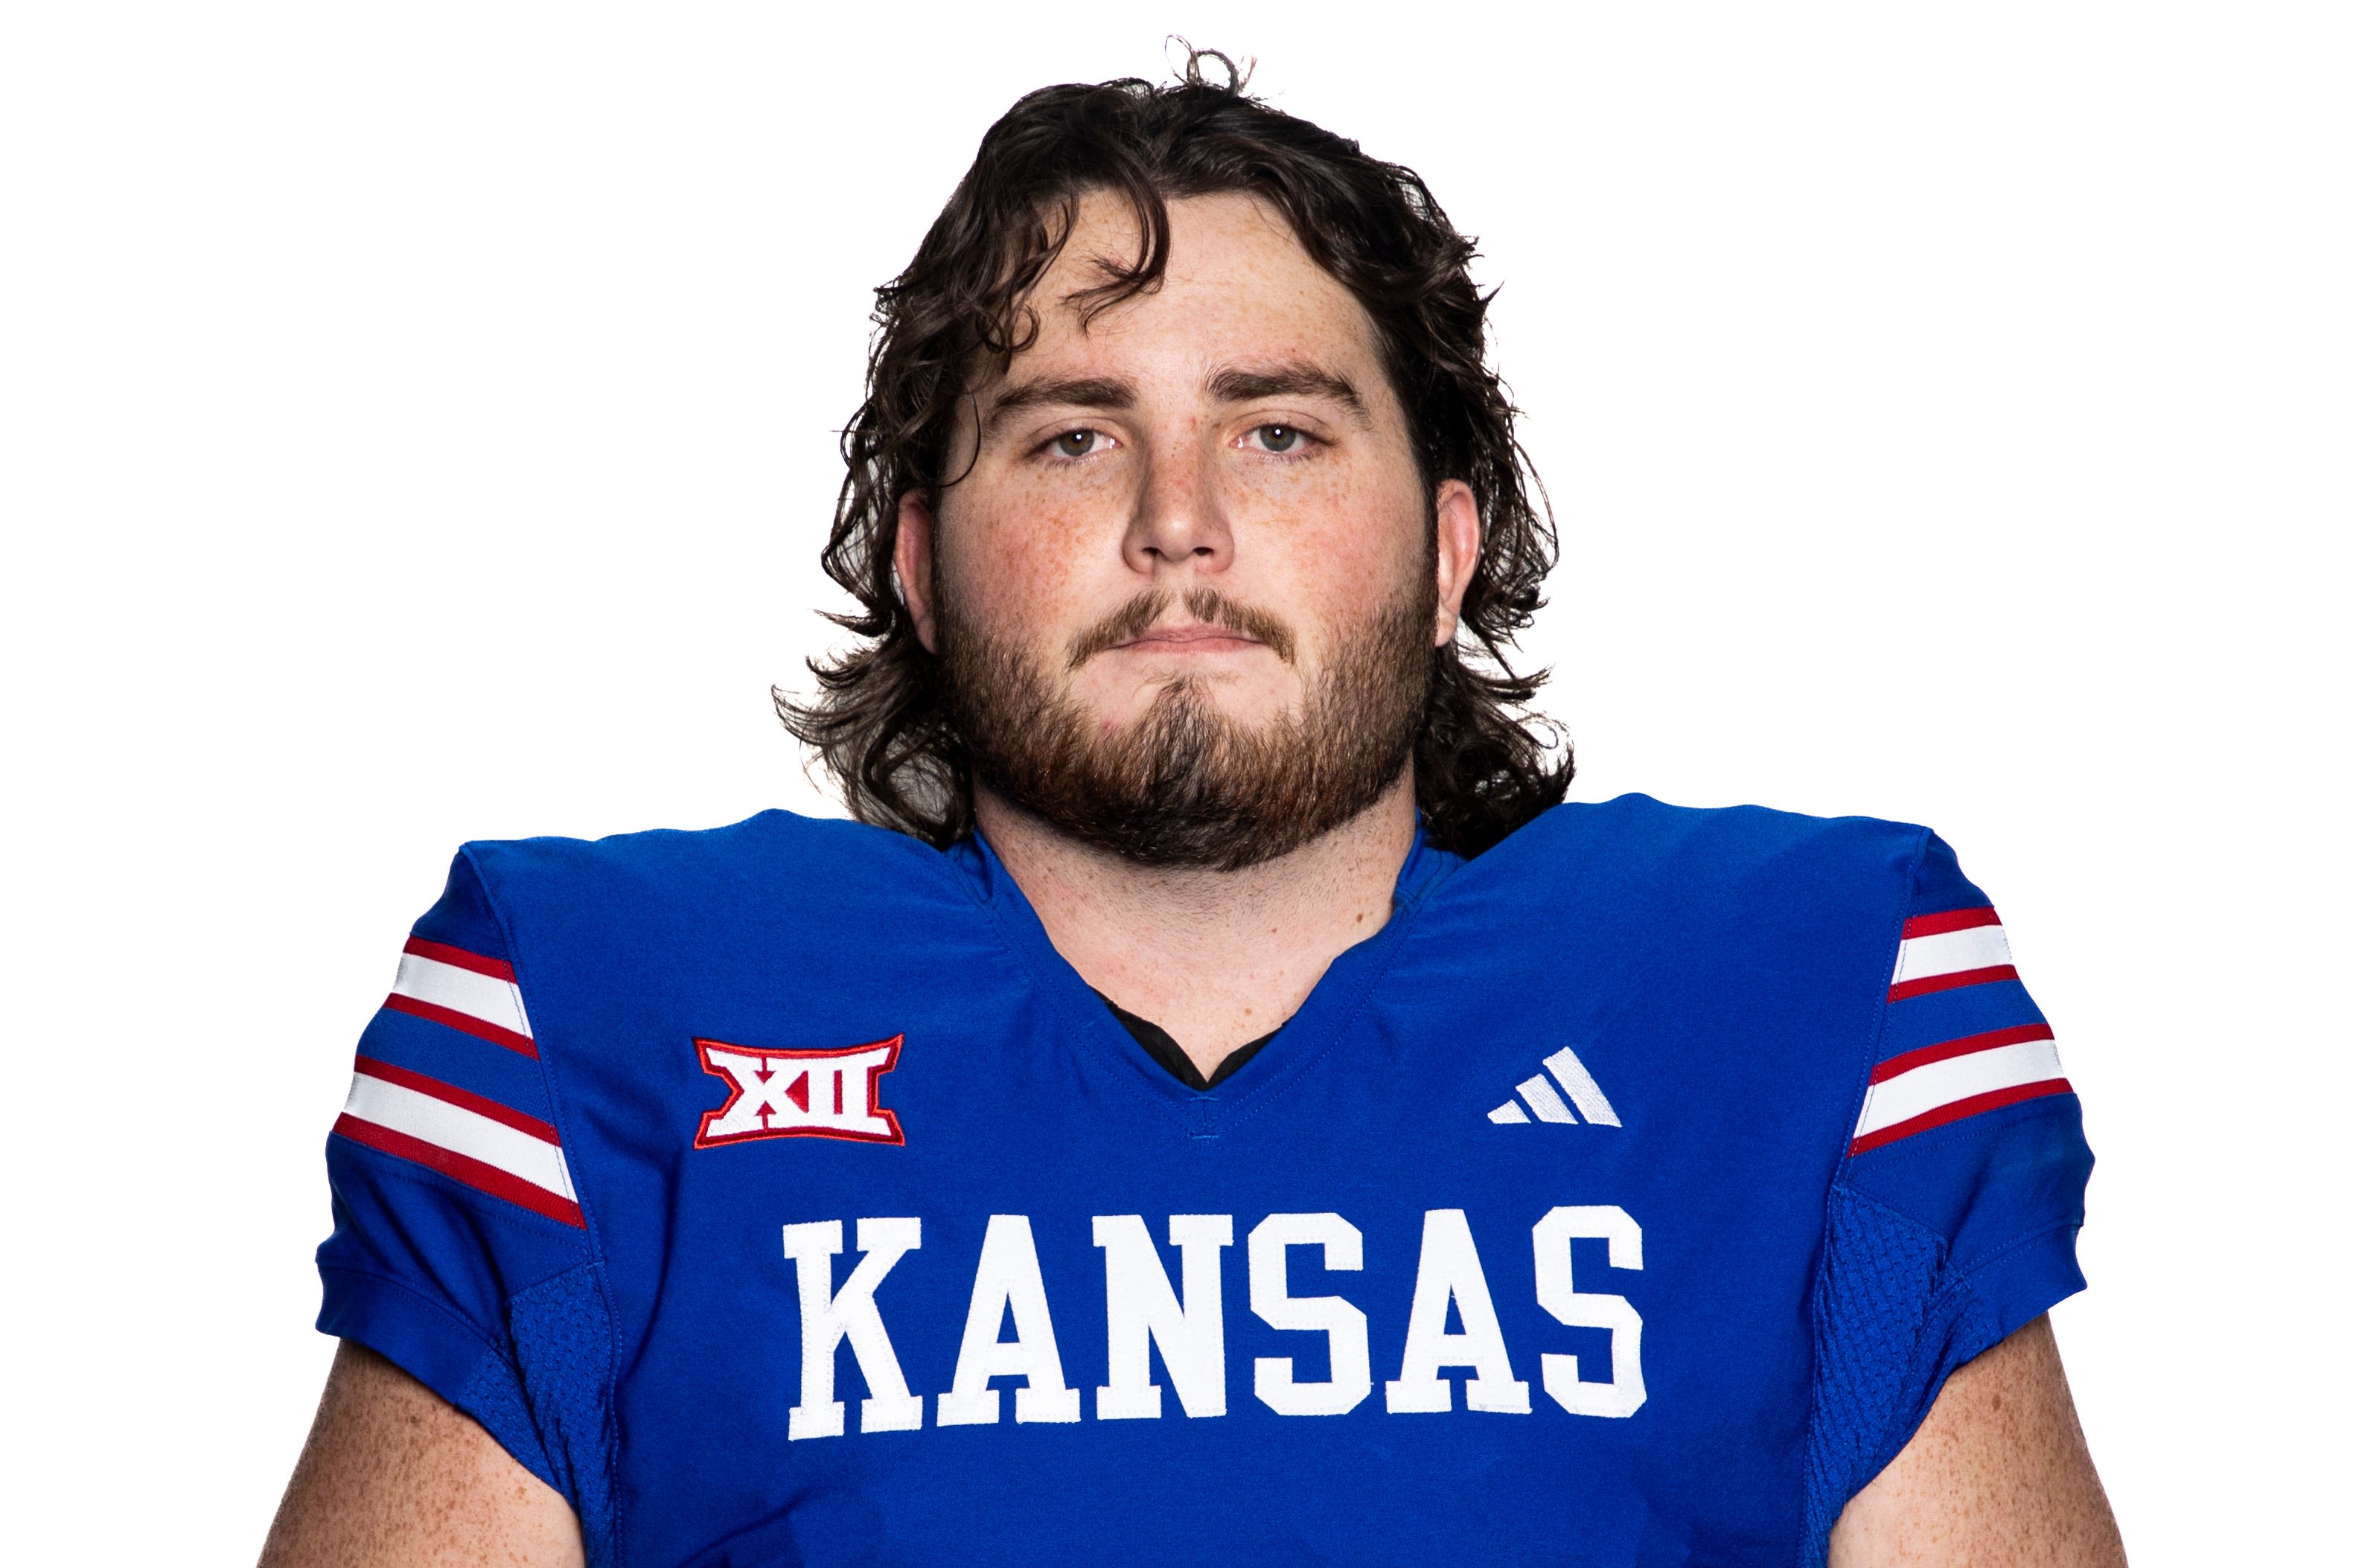 Shane Bumgardner’s efforts to become Kansas football’s starting center are ongoing